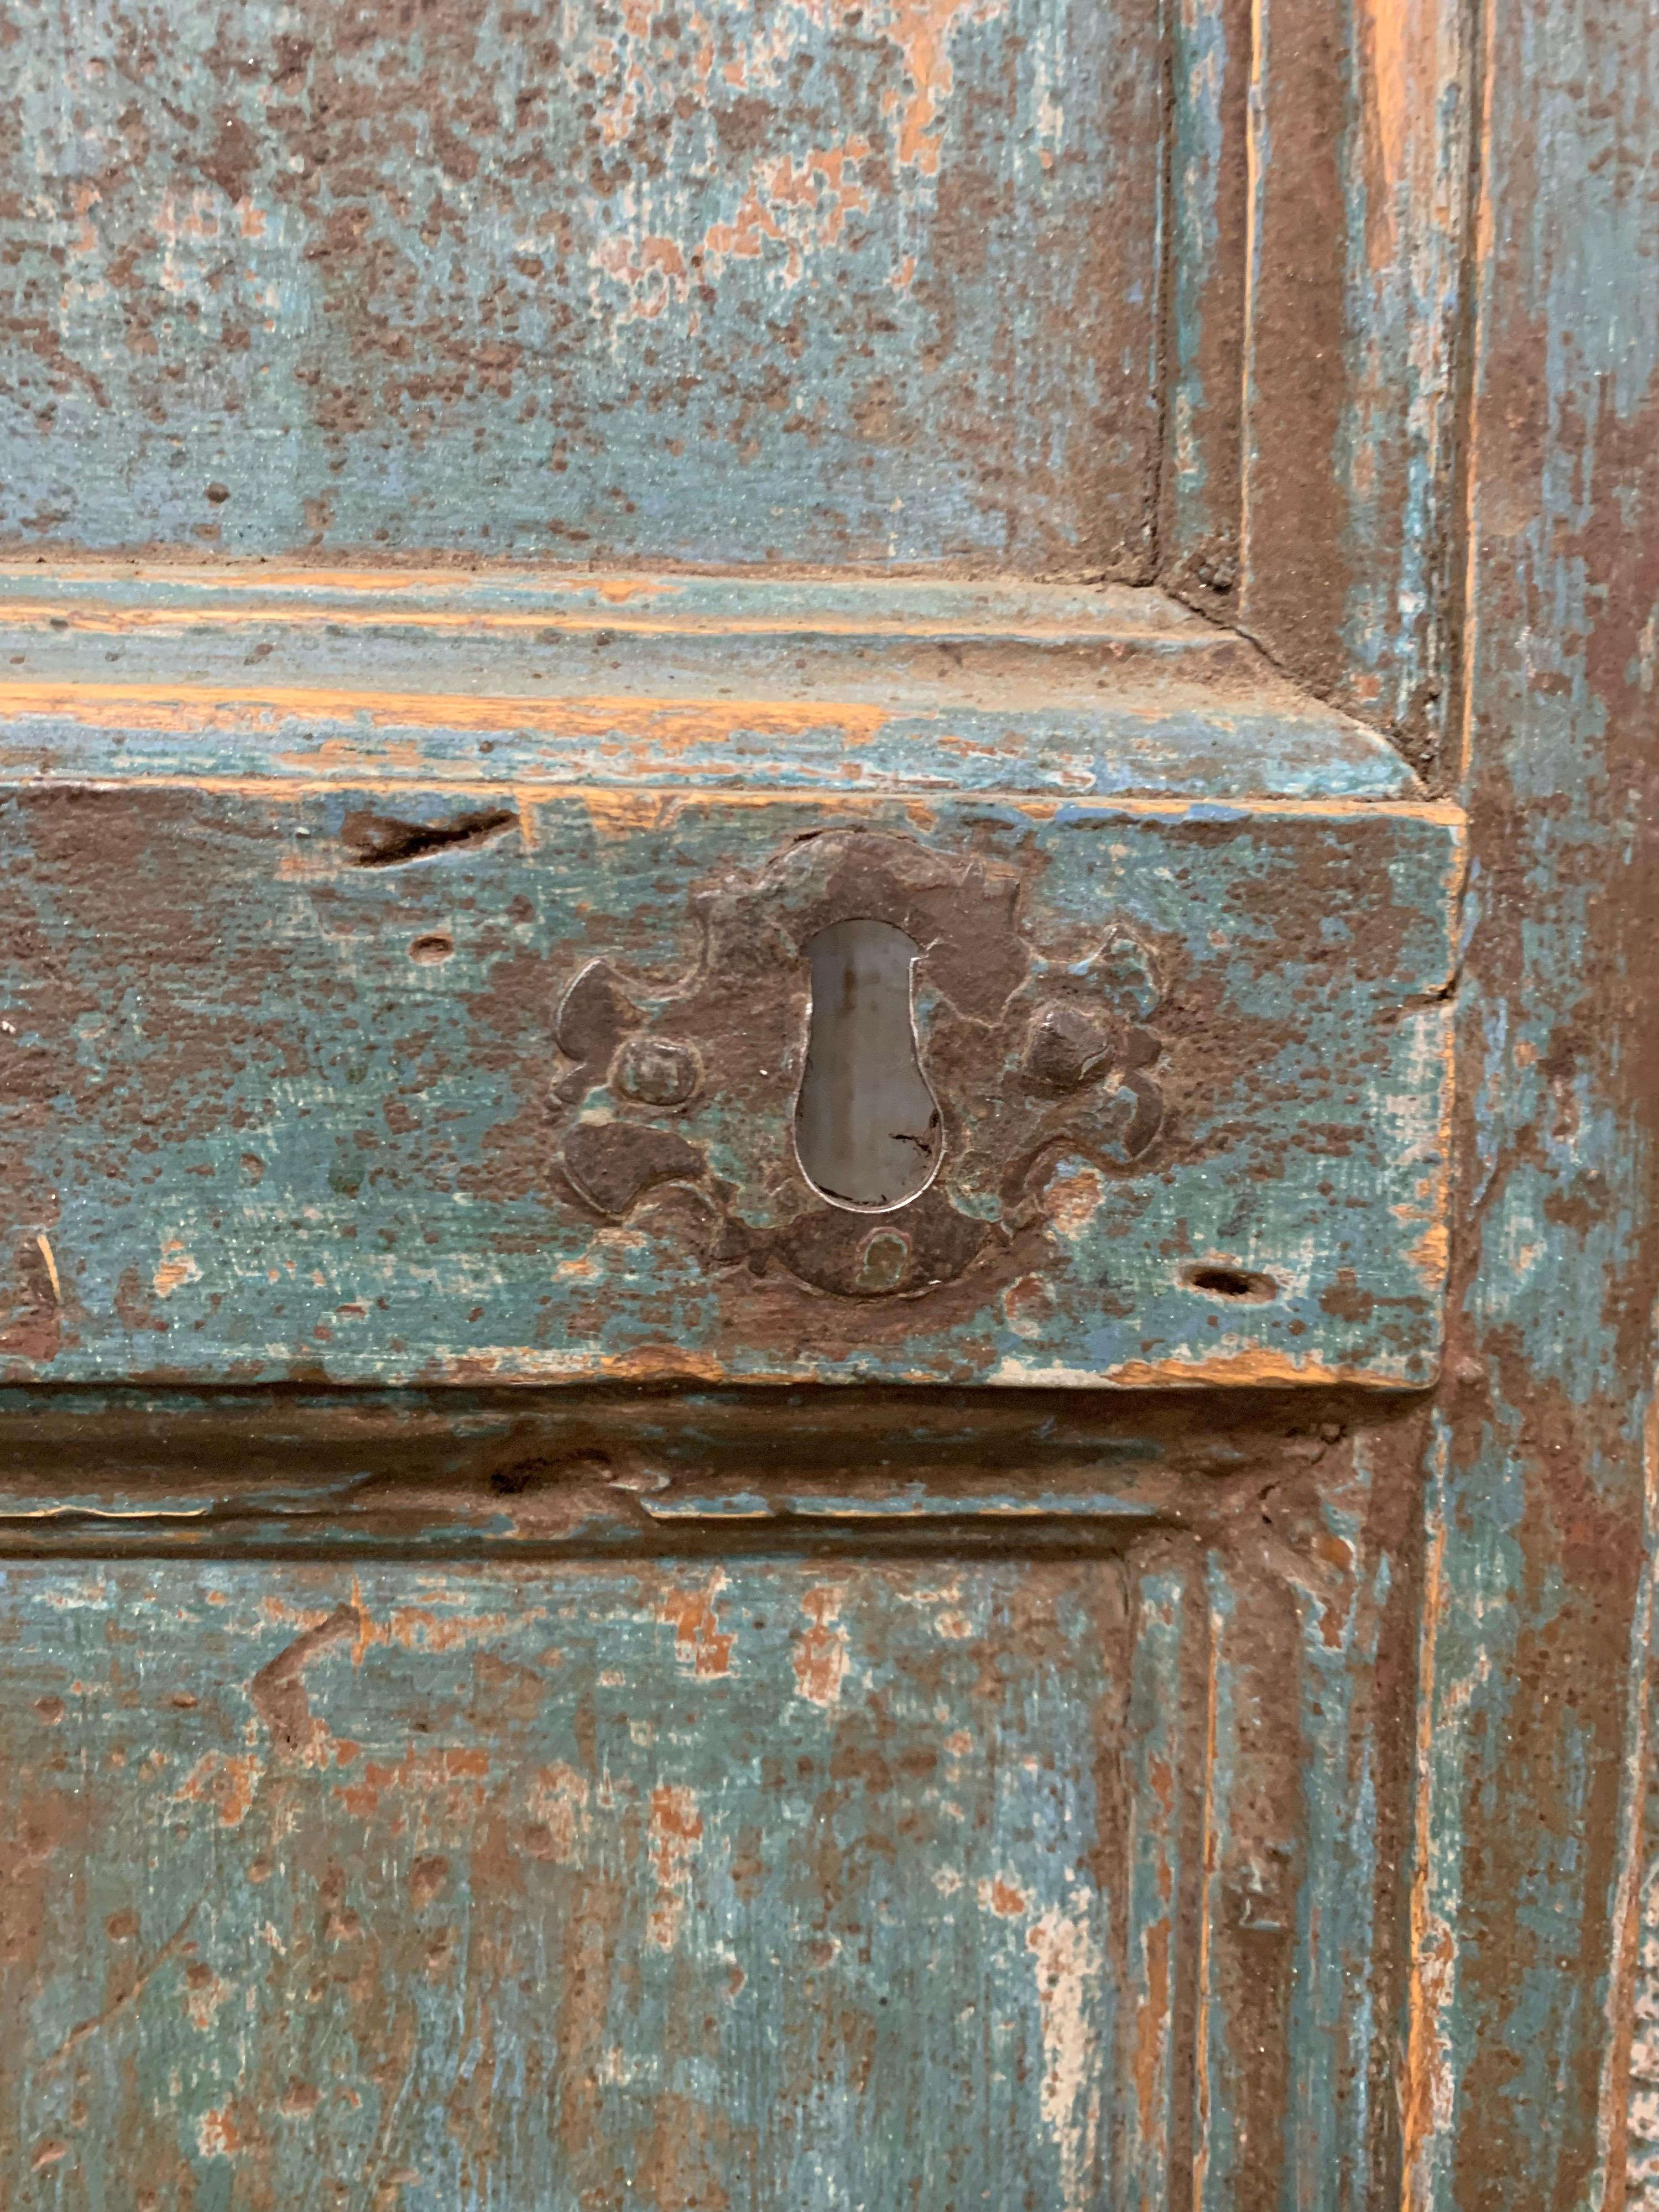 Beautiful faded teal polychrome paint, makes this antique Spanish door beautiful.  It makes for a great powder room door or wine cellar door as well.